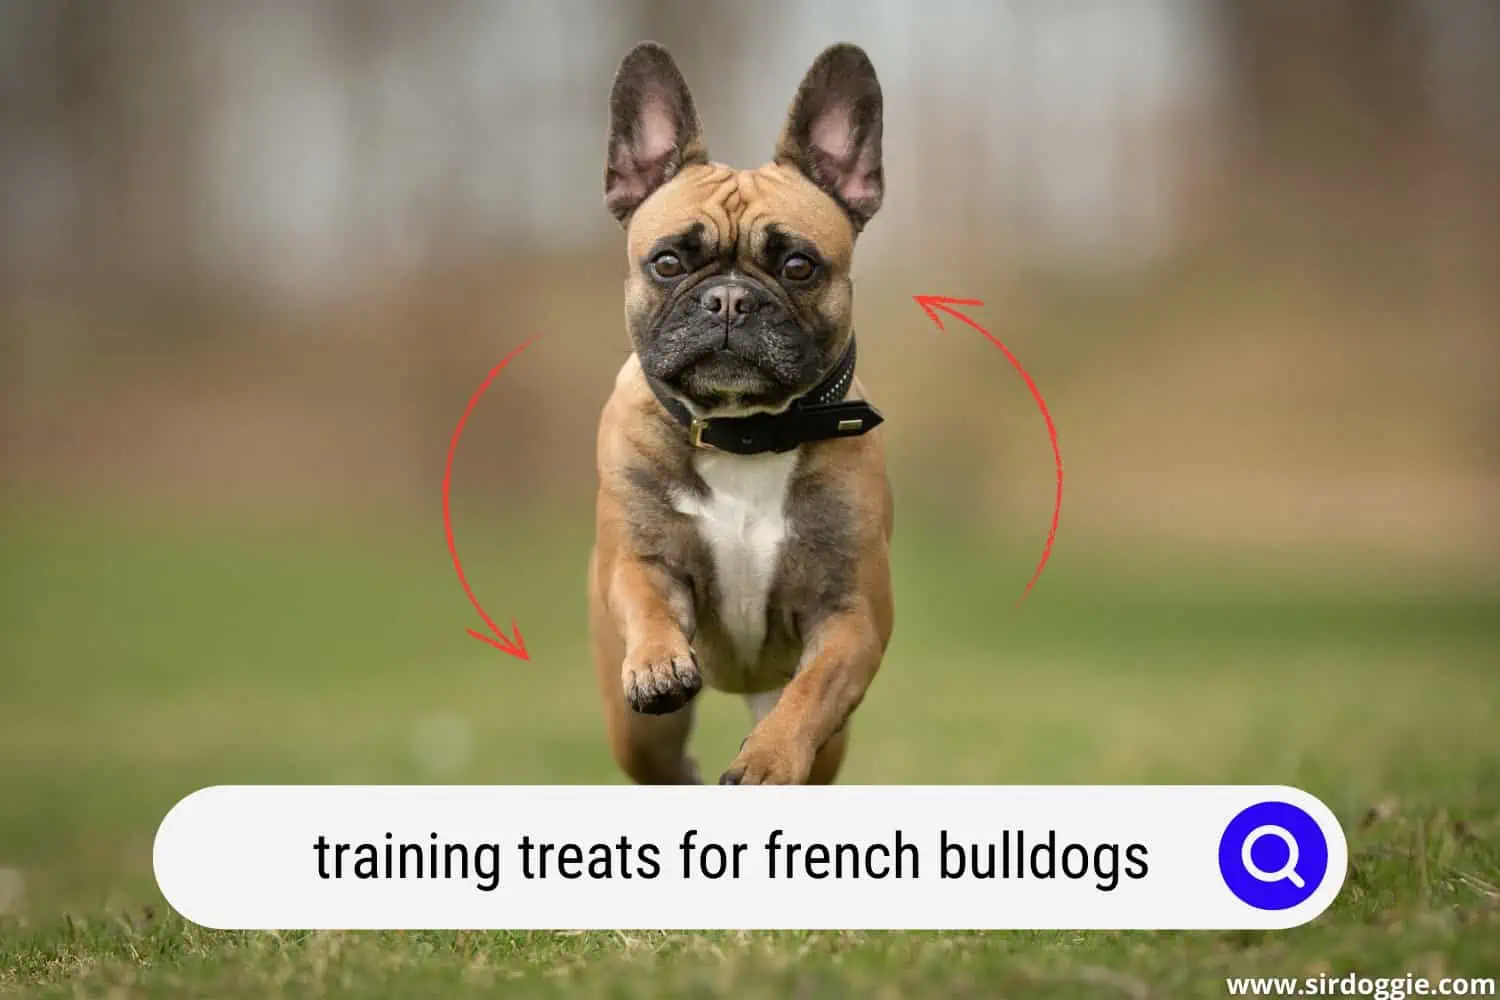 A French Bulldog on training, running in the field